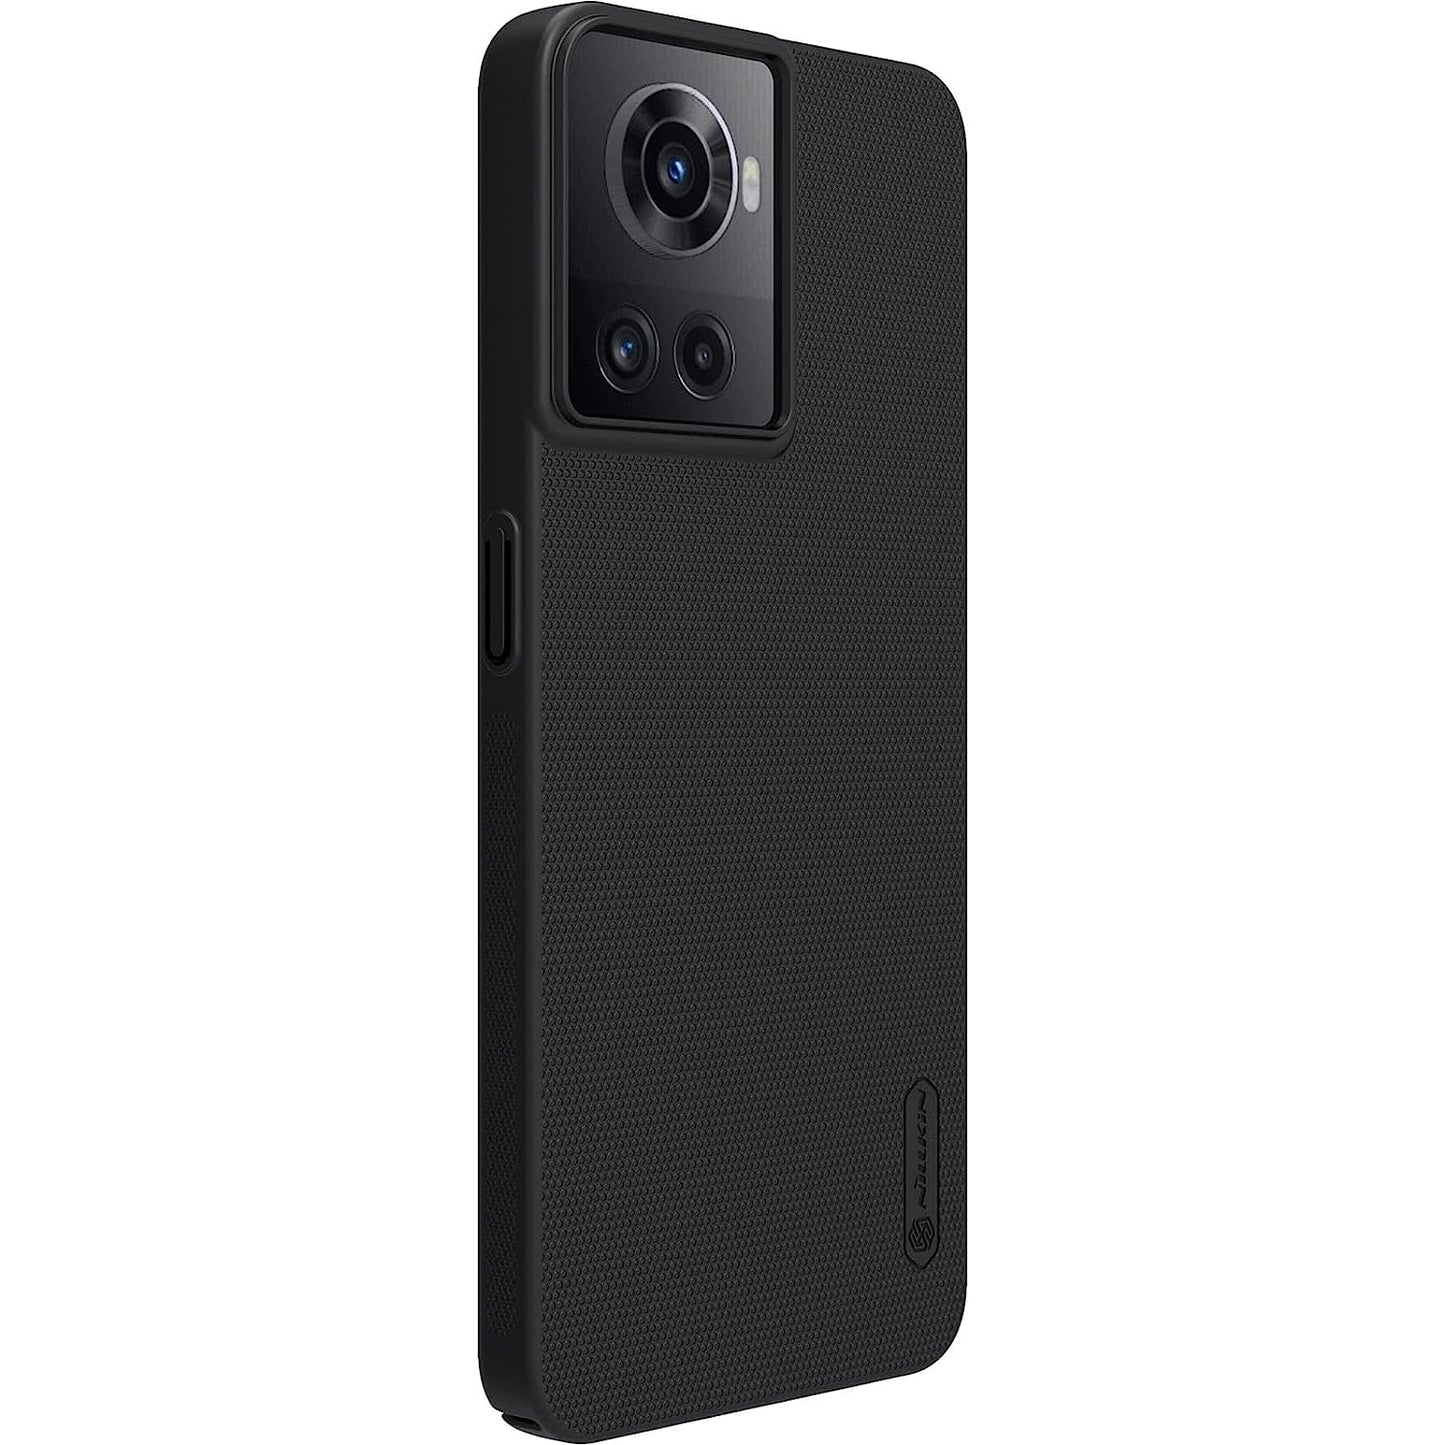 Nillkin Polycarbonate Case For One Plus 10 R Oneplus 10R 5G (6.7" Inch) Super Frosted Hard Back Dotted Grip Cover Pc Black